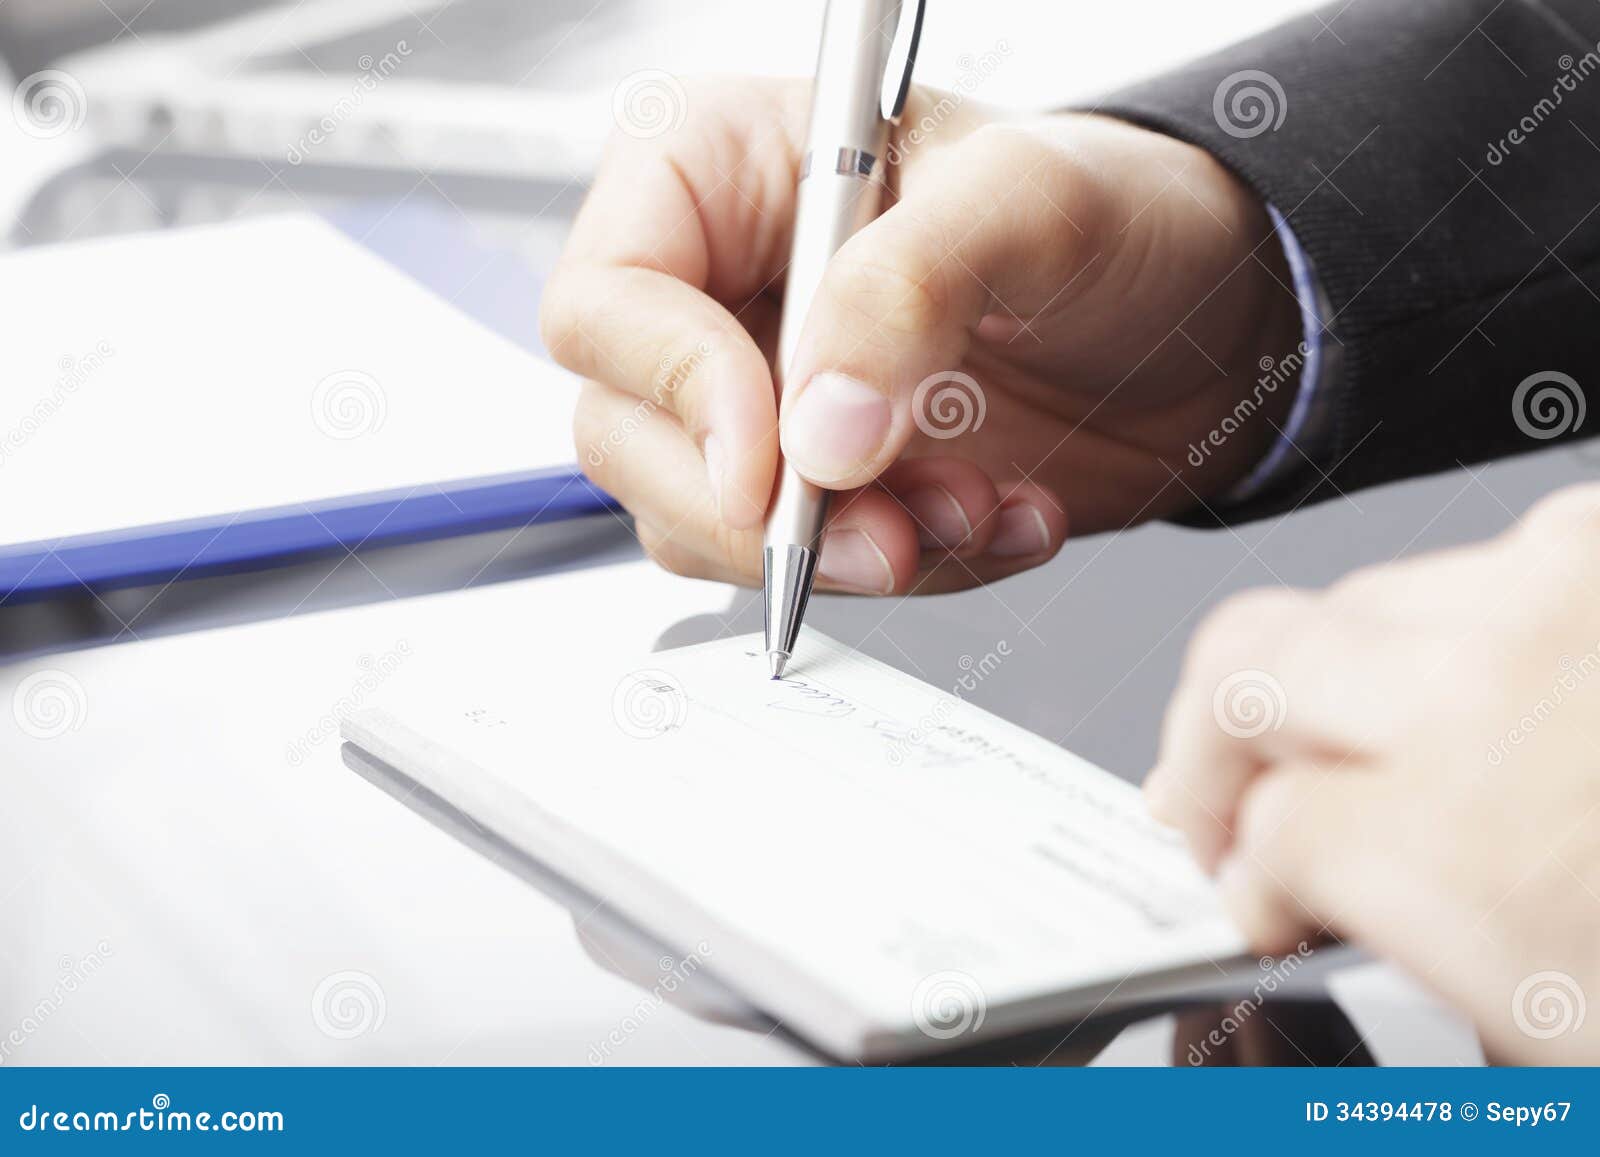 Filling a cheque stock photo. Image of hand, full, document - 34394478